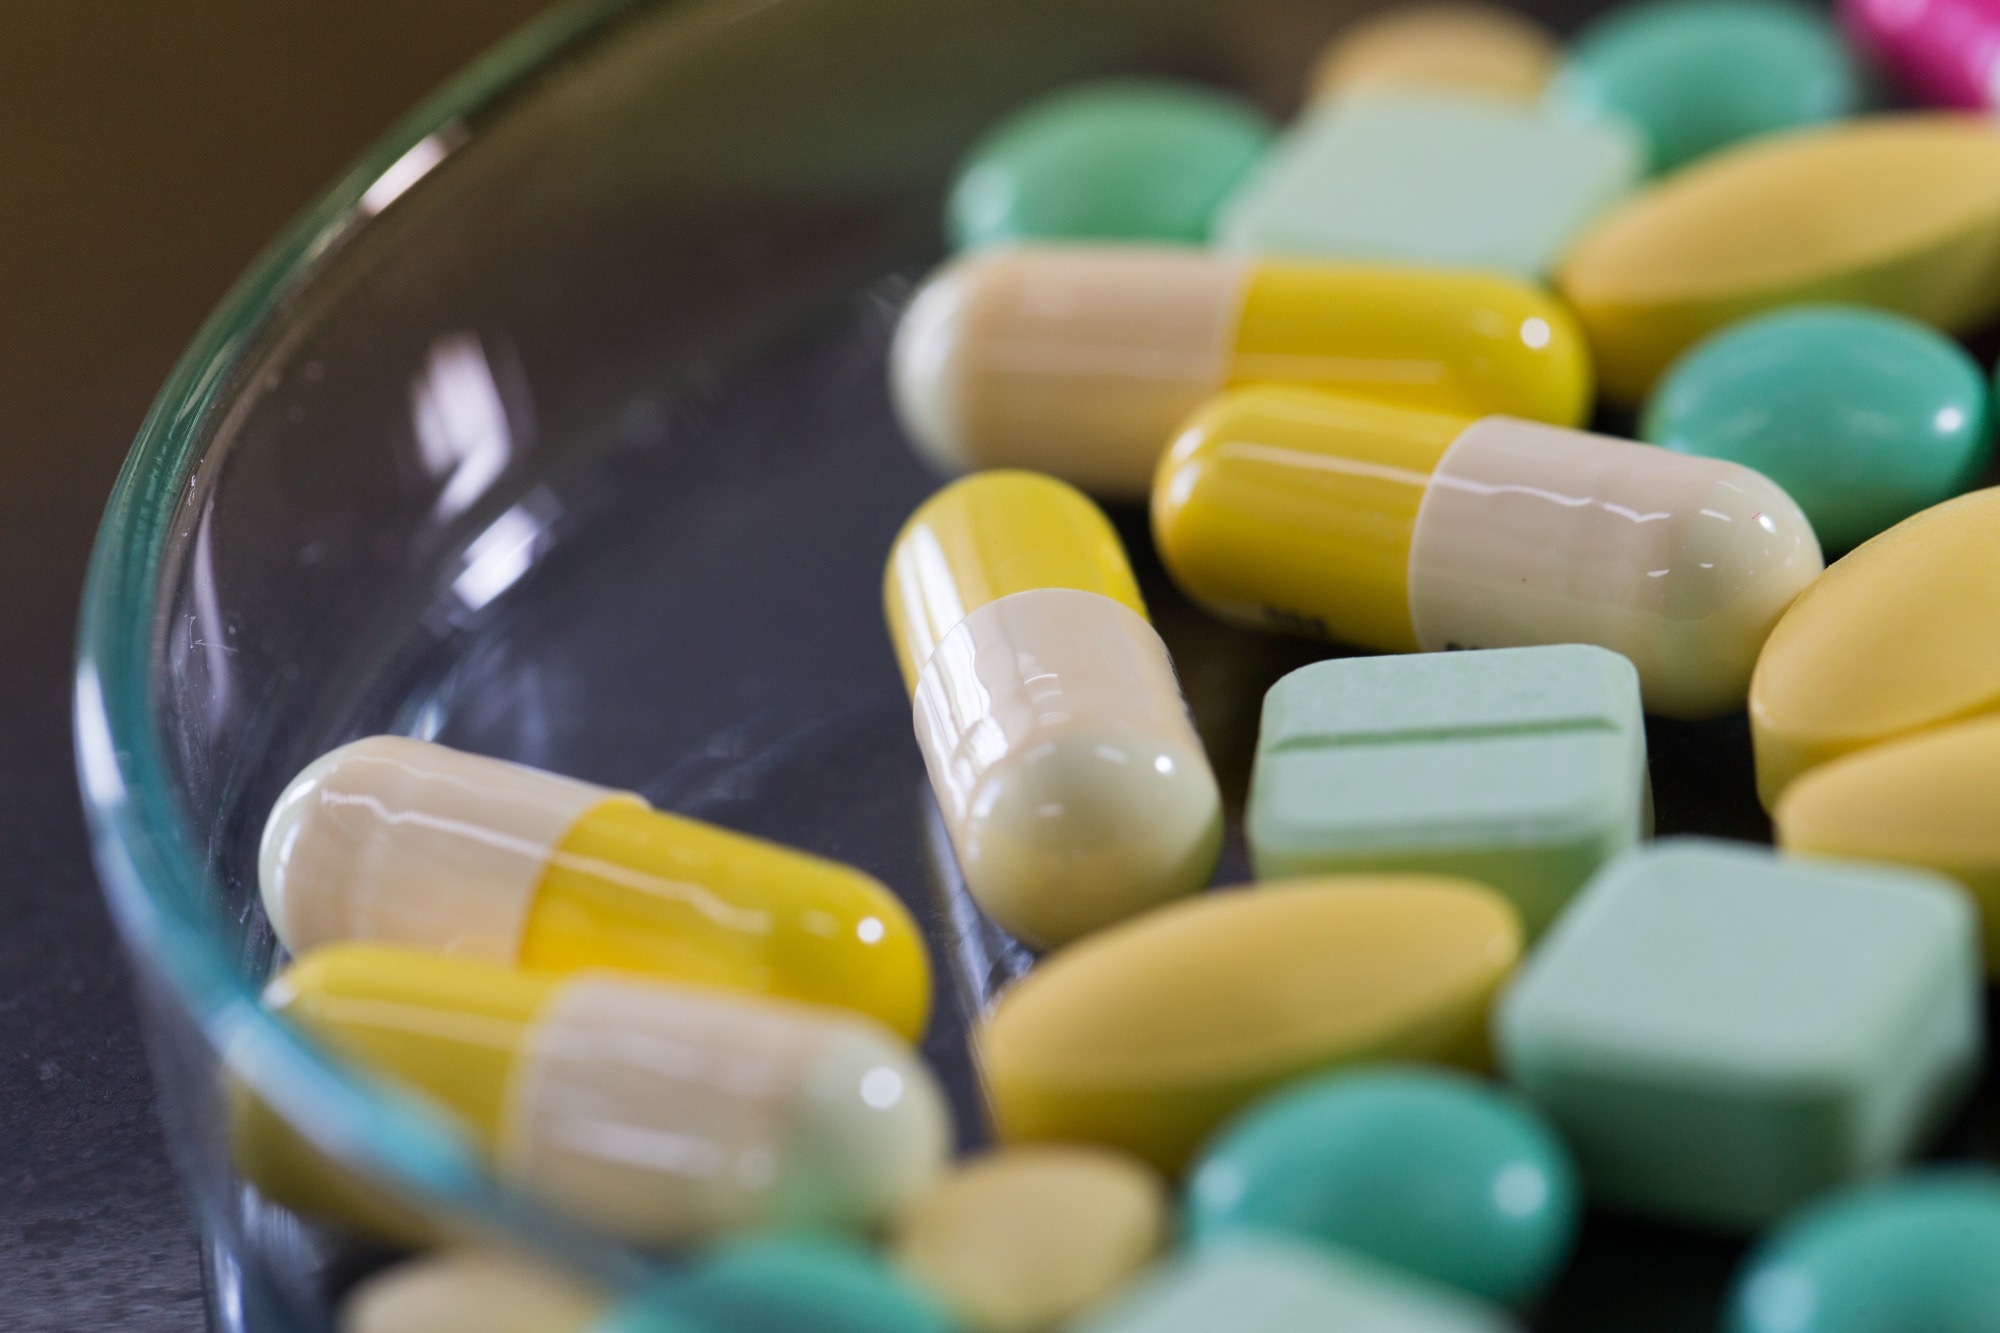 Study: Towards One Health surveillance of antibiotic resistance: characterisation and mapping of existing programmes in humans, animals, food and the environment in France, 2021. Image Credit: RattiyaThongdumhyu/Shutterstock.com